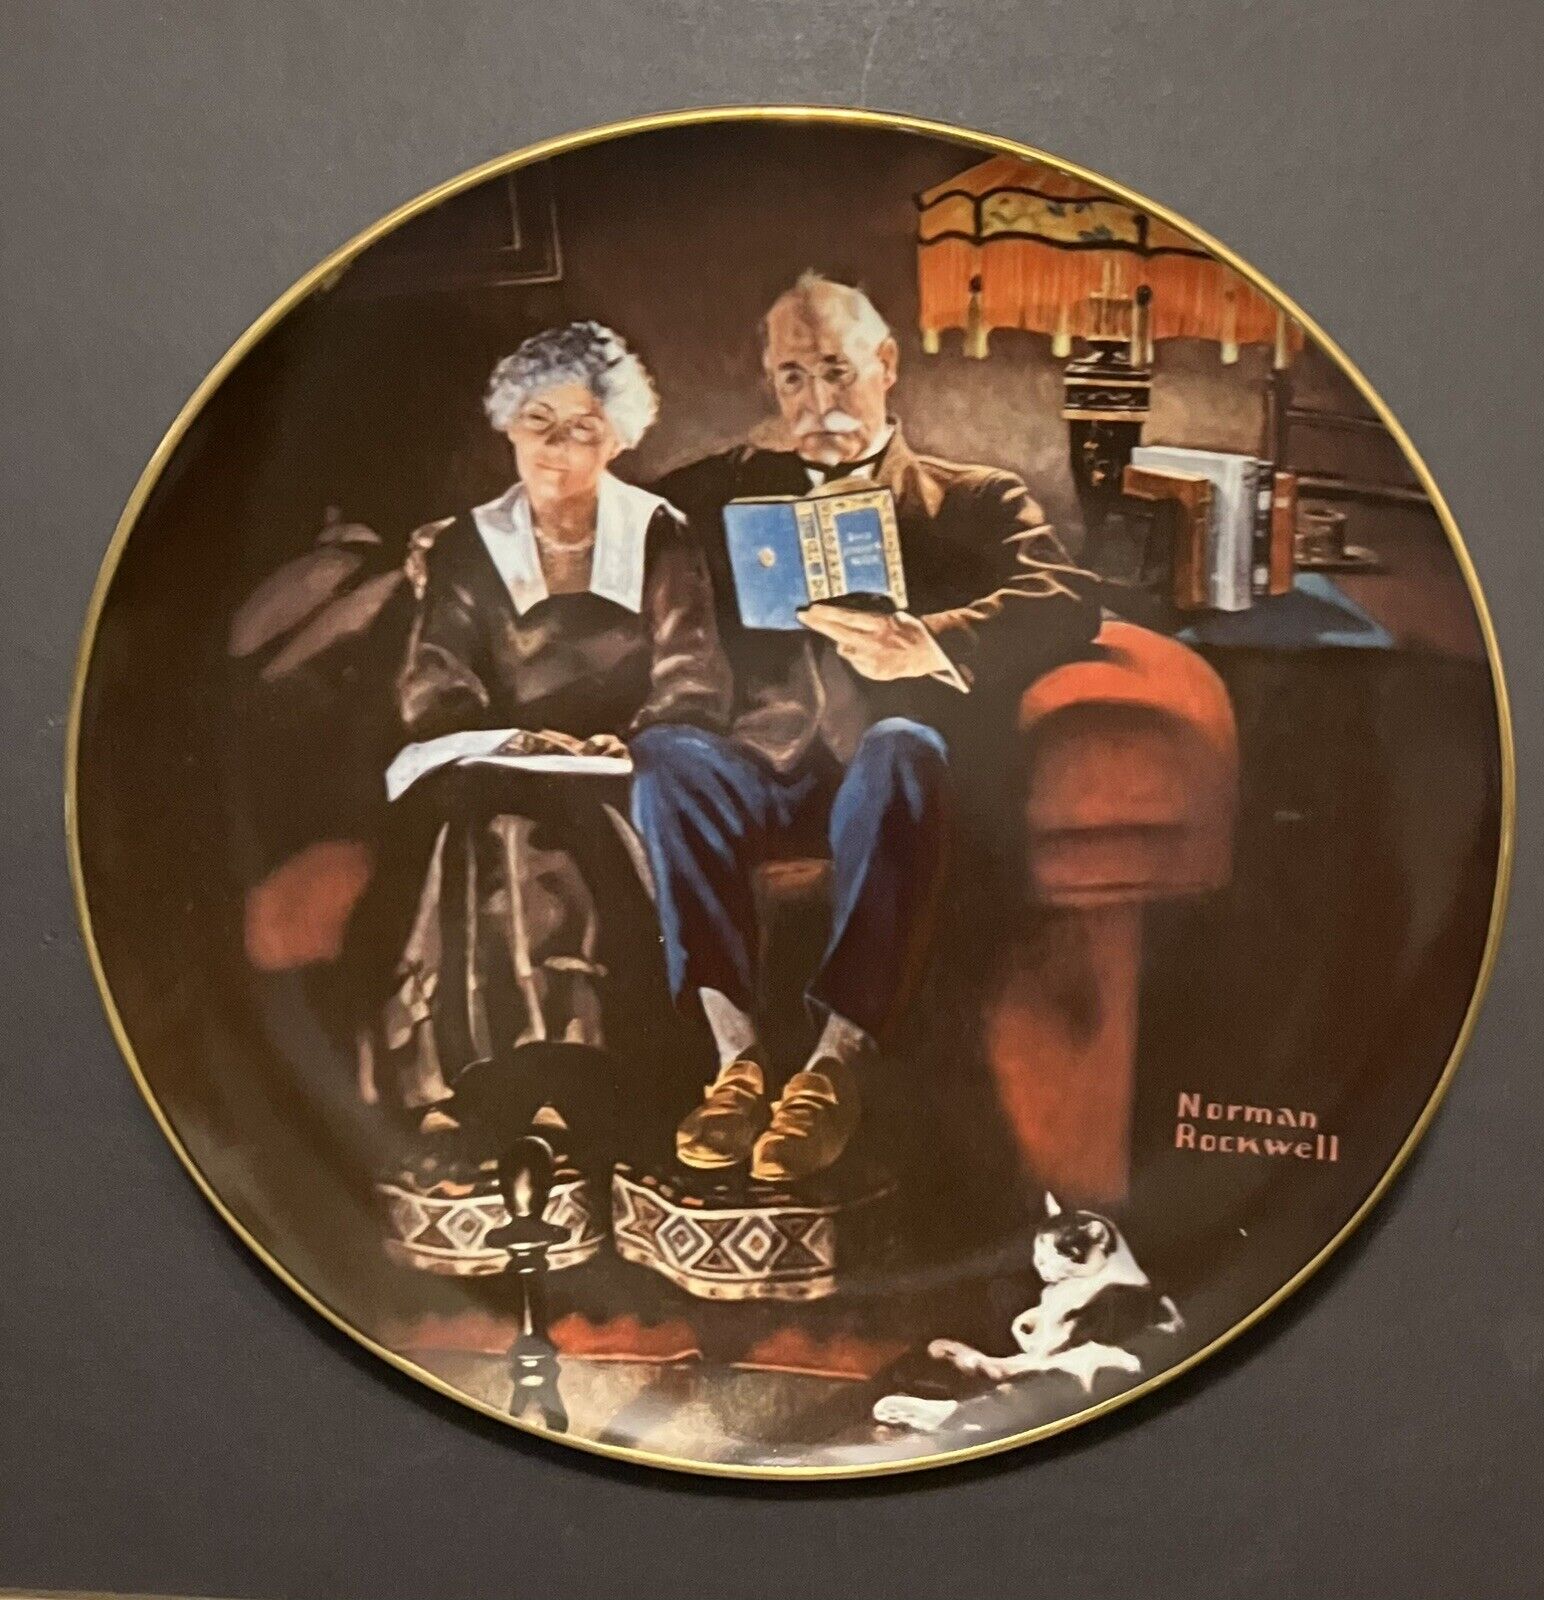 Norman Rockwell’s Light Campaign Series-“Evenings Ease “